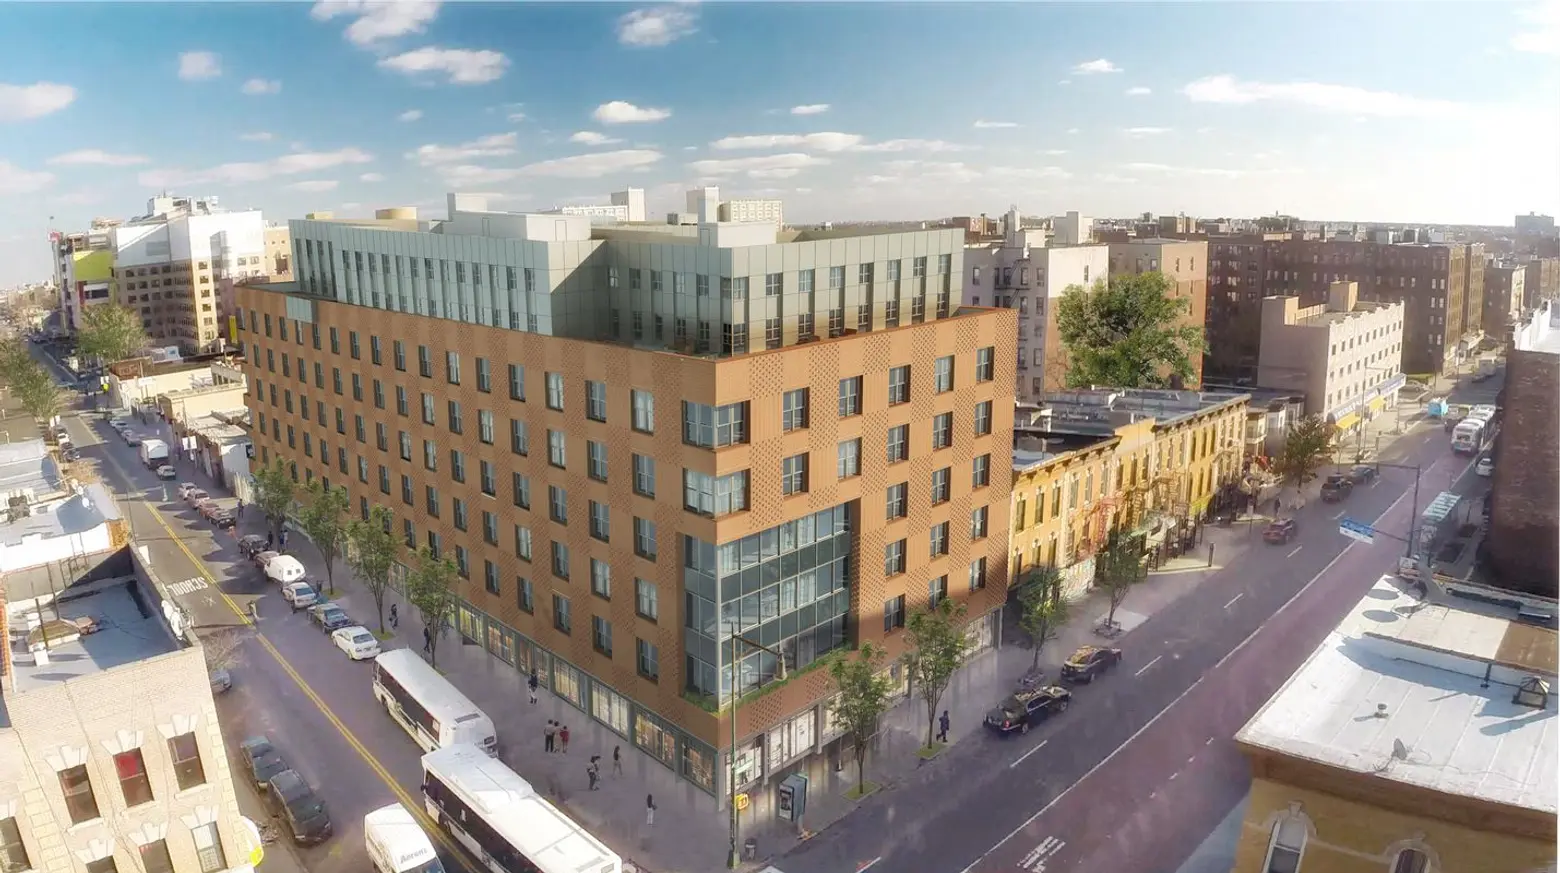 Lottery launches at brand new rental in Prospect-Lefferts Gardens, from $1,525/month